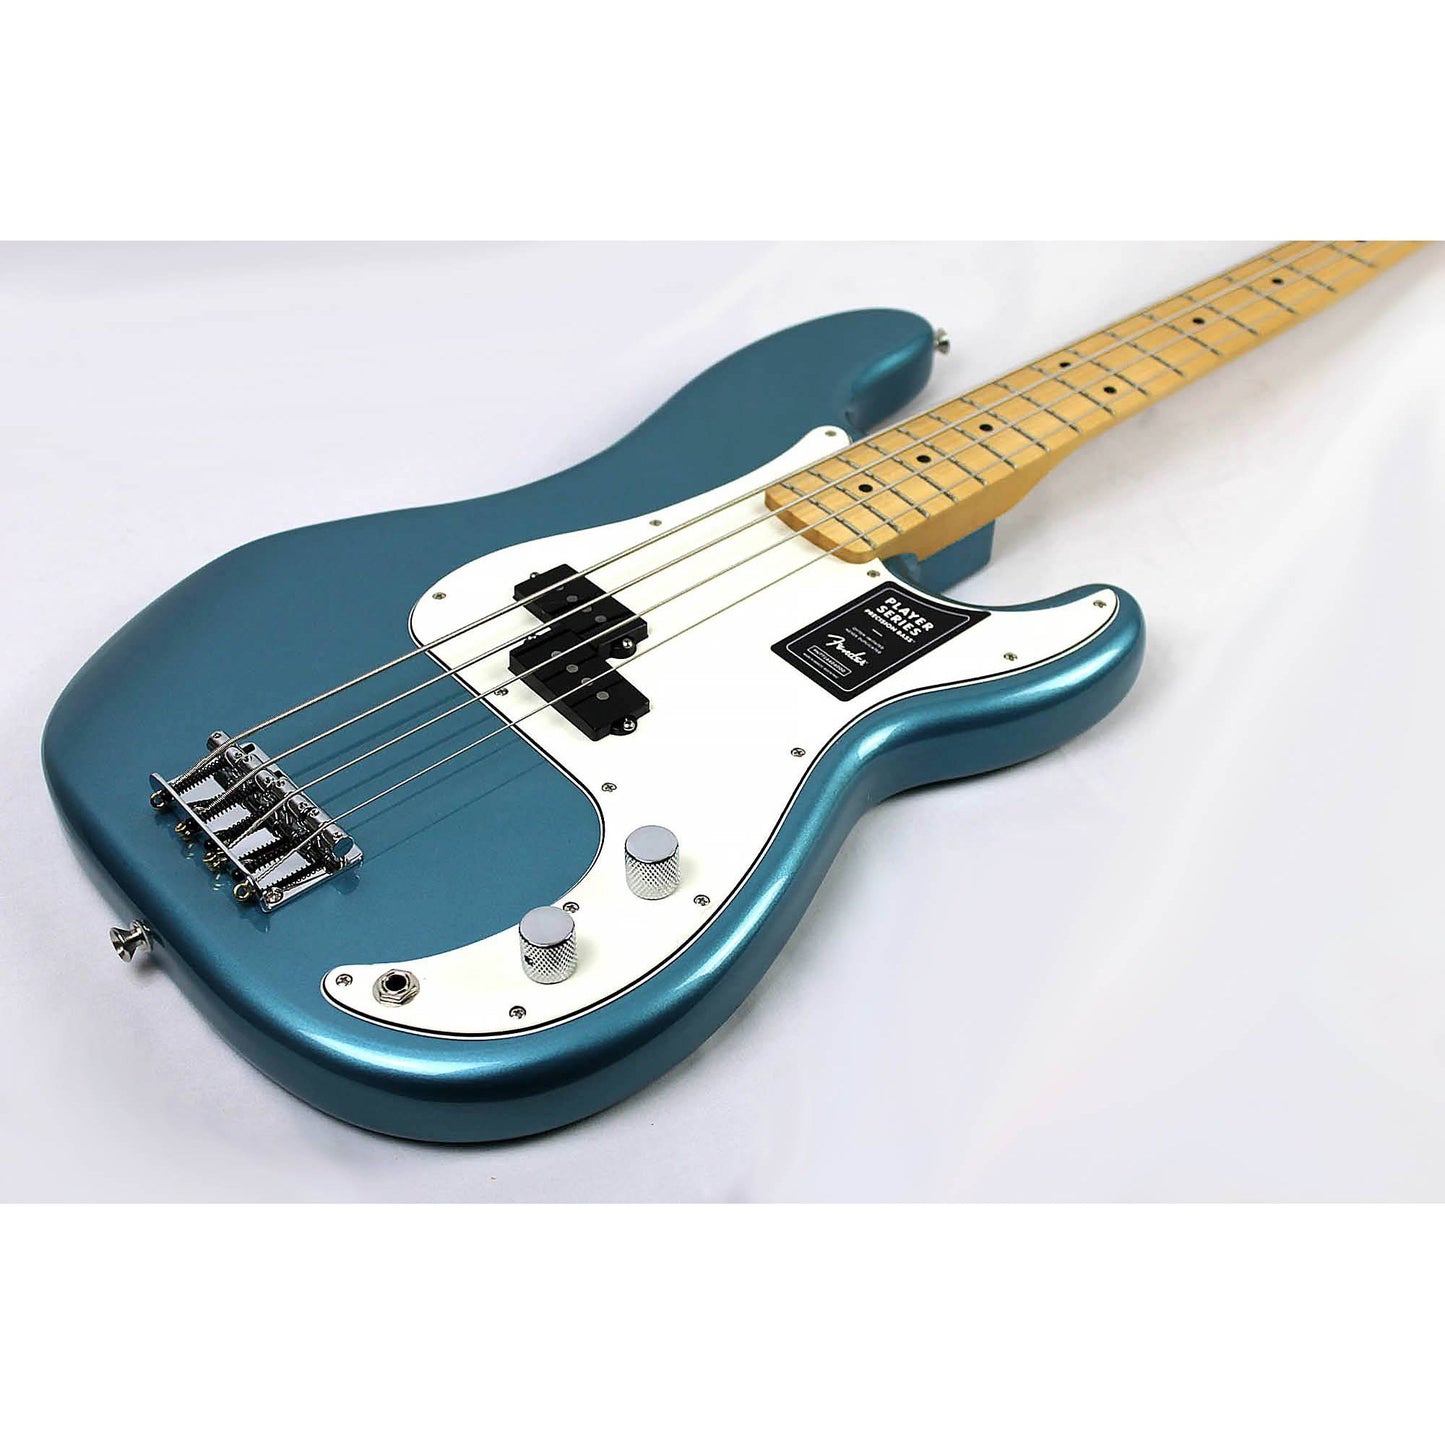 Fender Player Precision Bass - Tidepool with Maple Fingerboard - Leitz Music-885978911134-0149802513